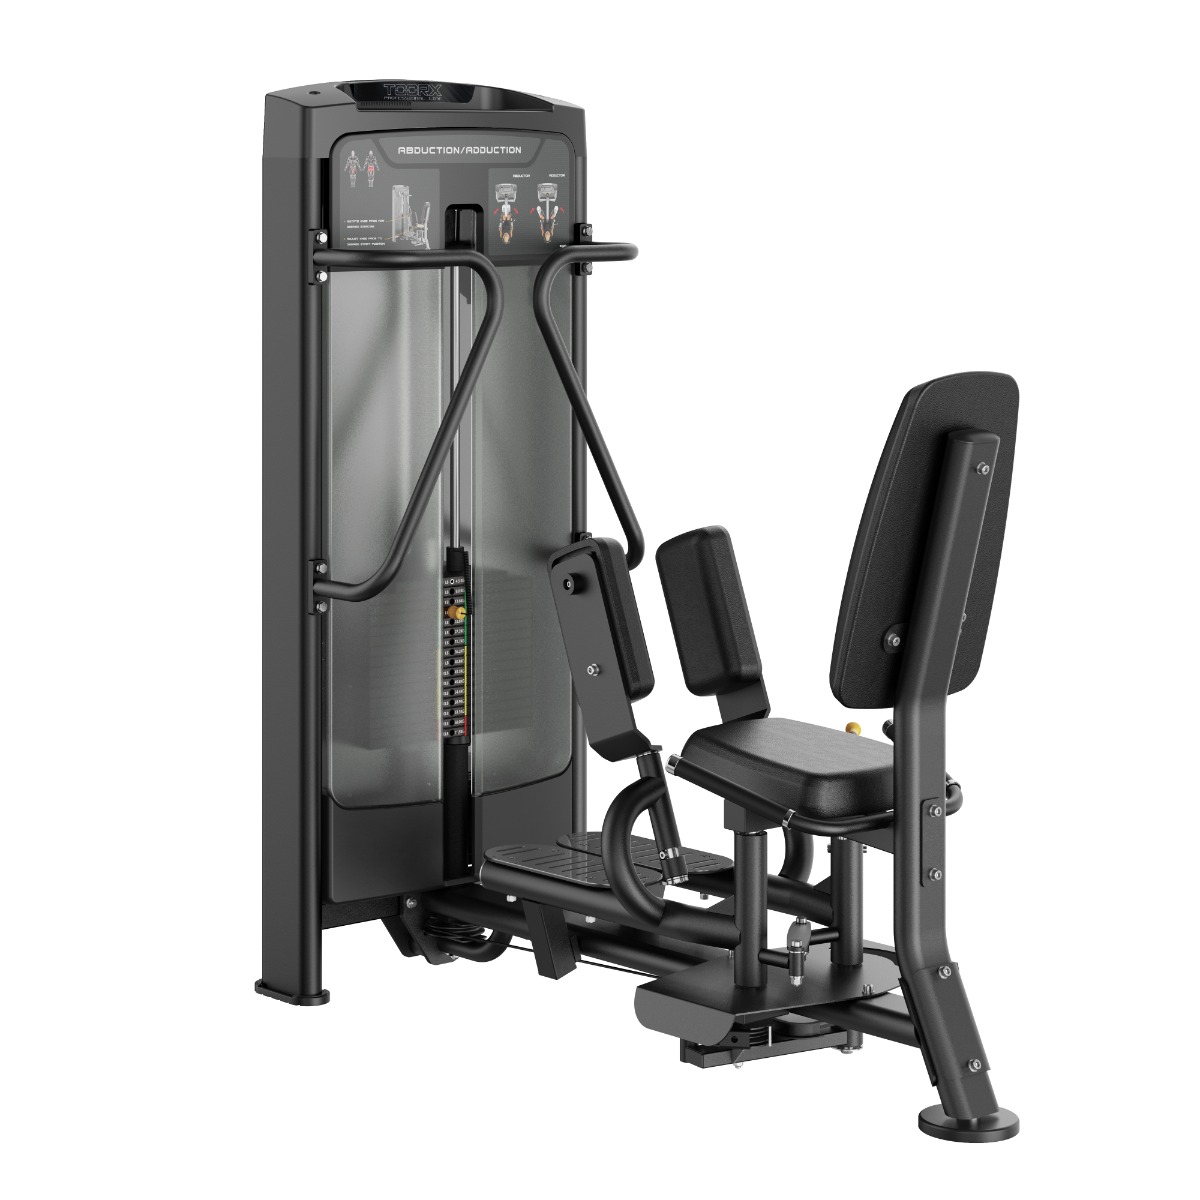 Toorx Absolute Line Abductor / Adductor - PLX 9700 